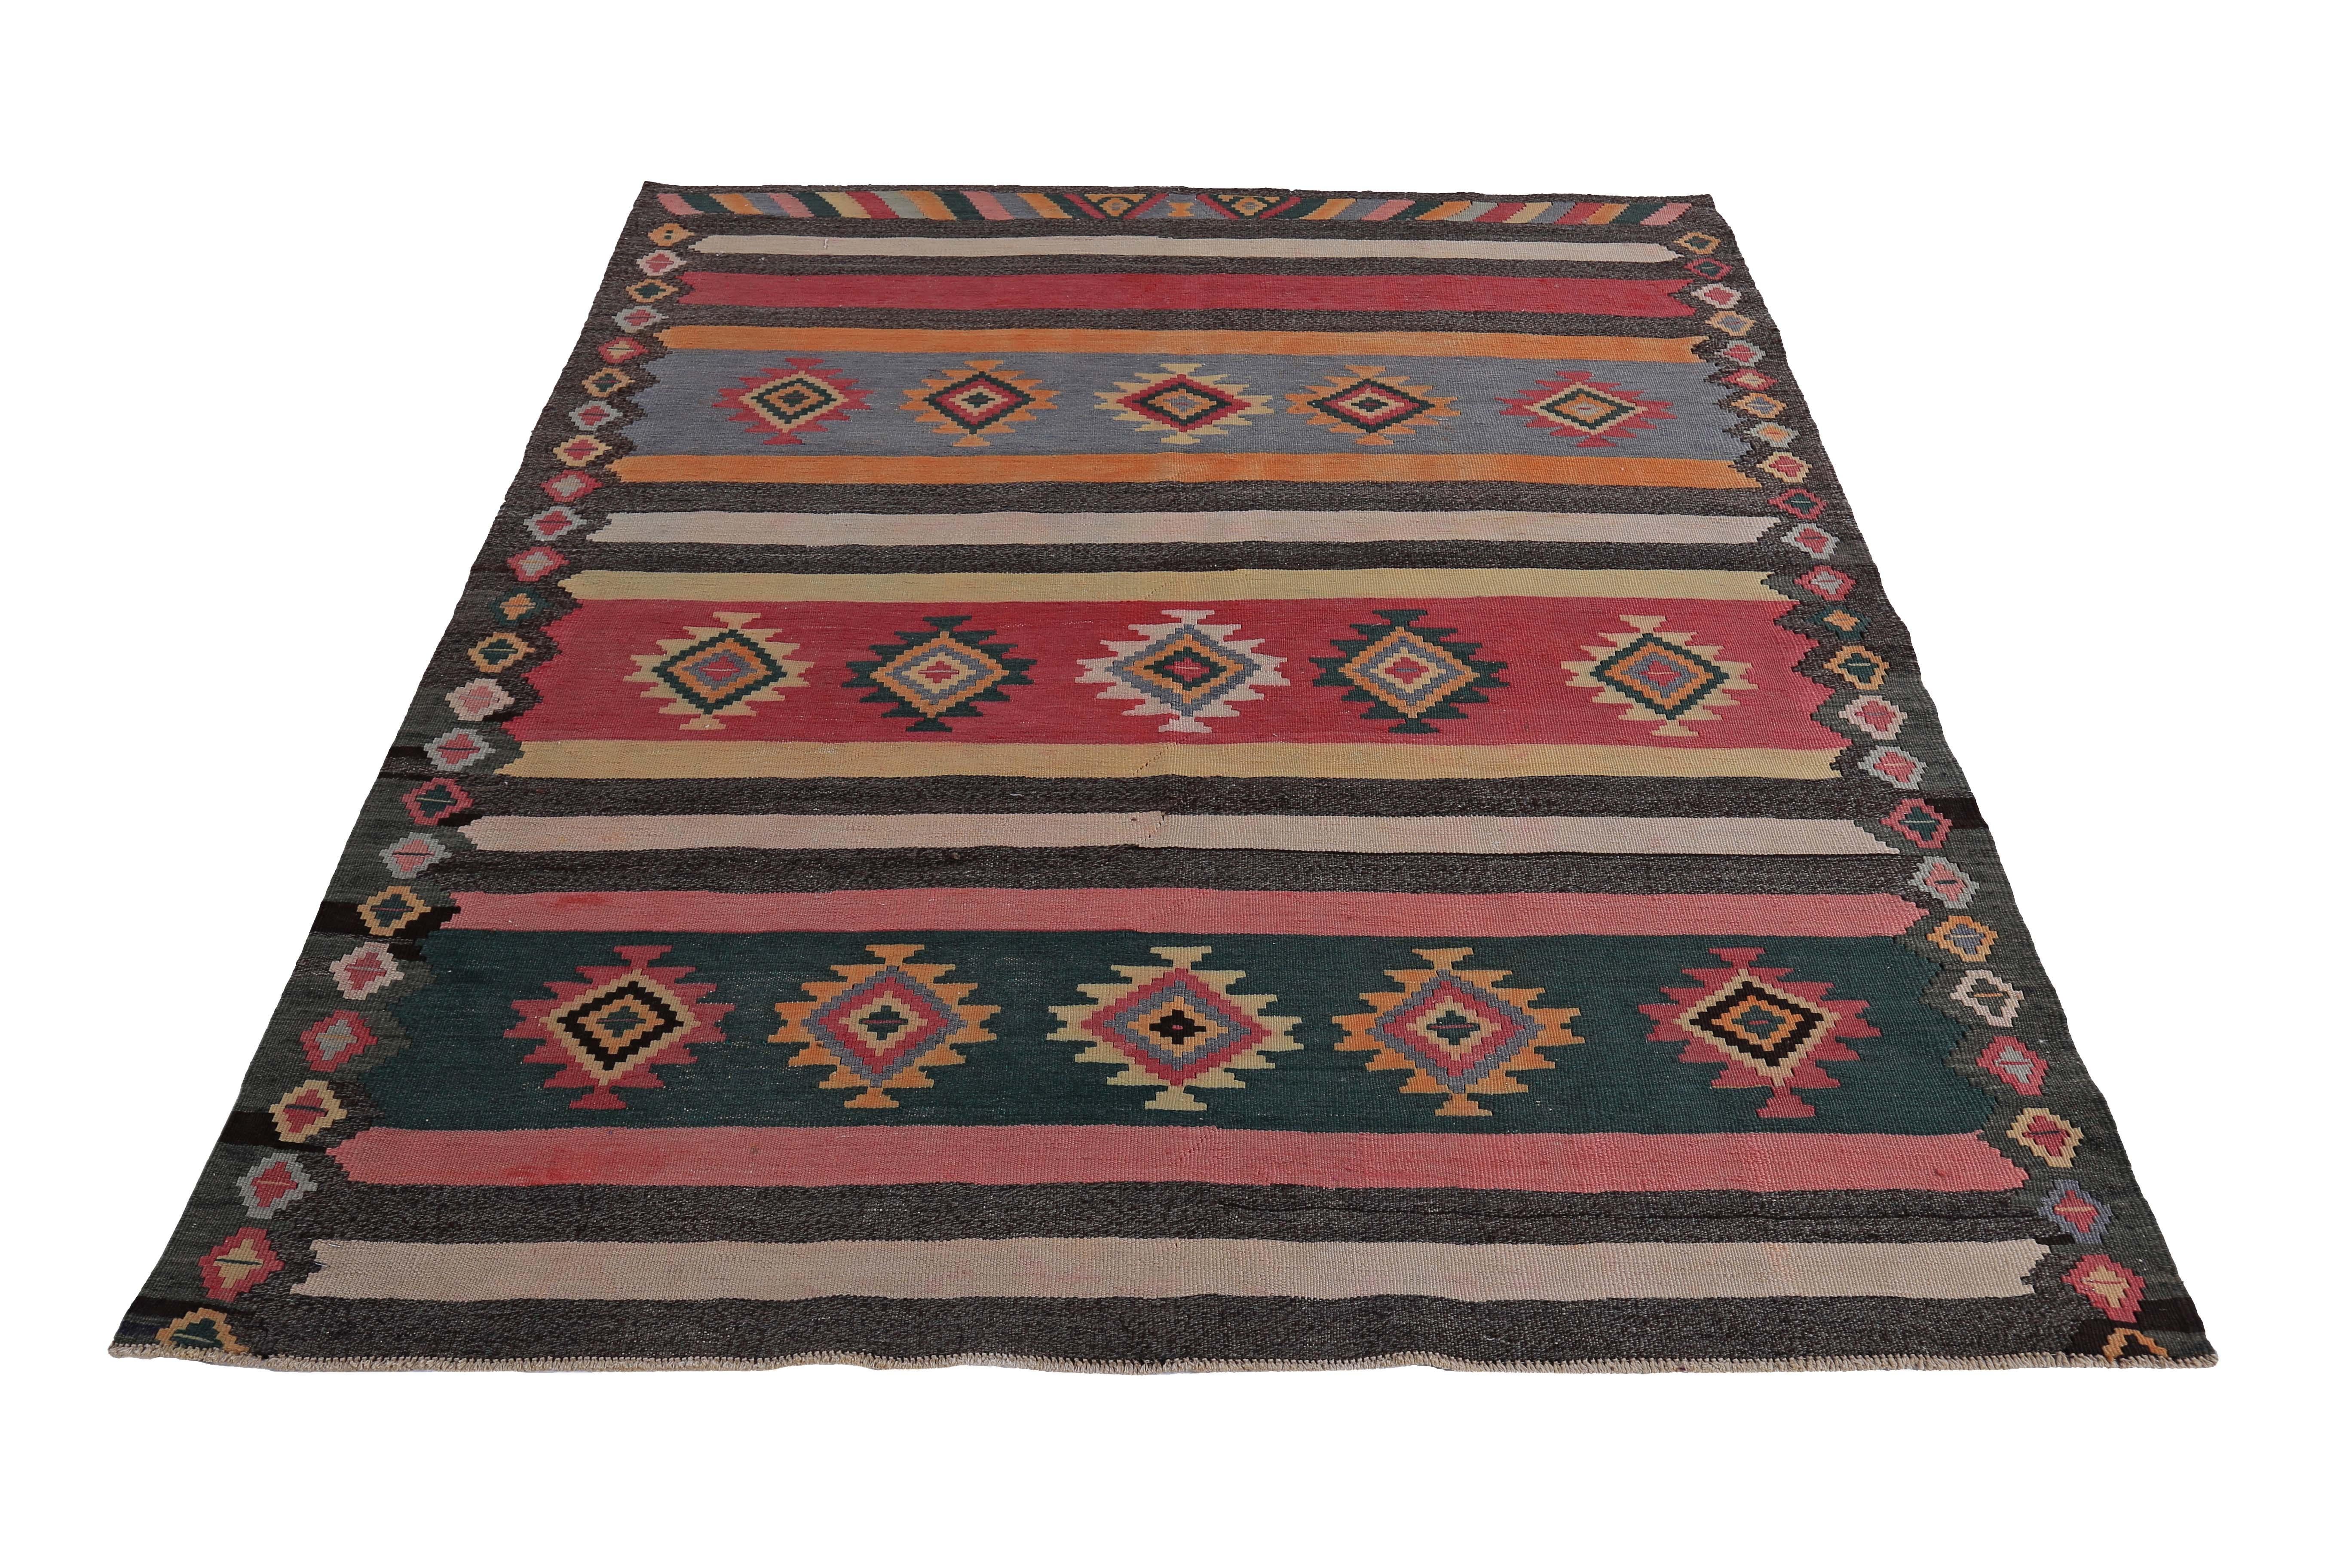 Modern Turkish rug handwoven from the finest sheep’s wool and colored with all-natural vegetable dyes that are safe for humans and pets. It’s a traditional Kilim flat-weave design featuring red, blue, brown and orange with tribal diamonds. It’s a